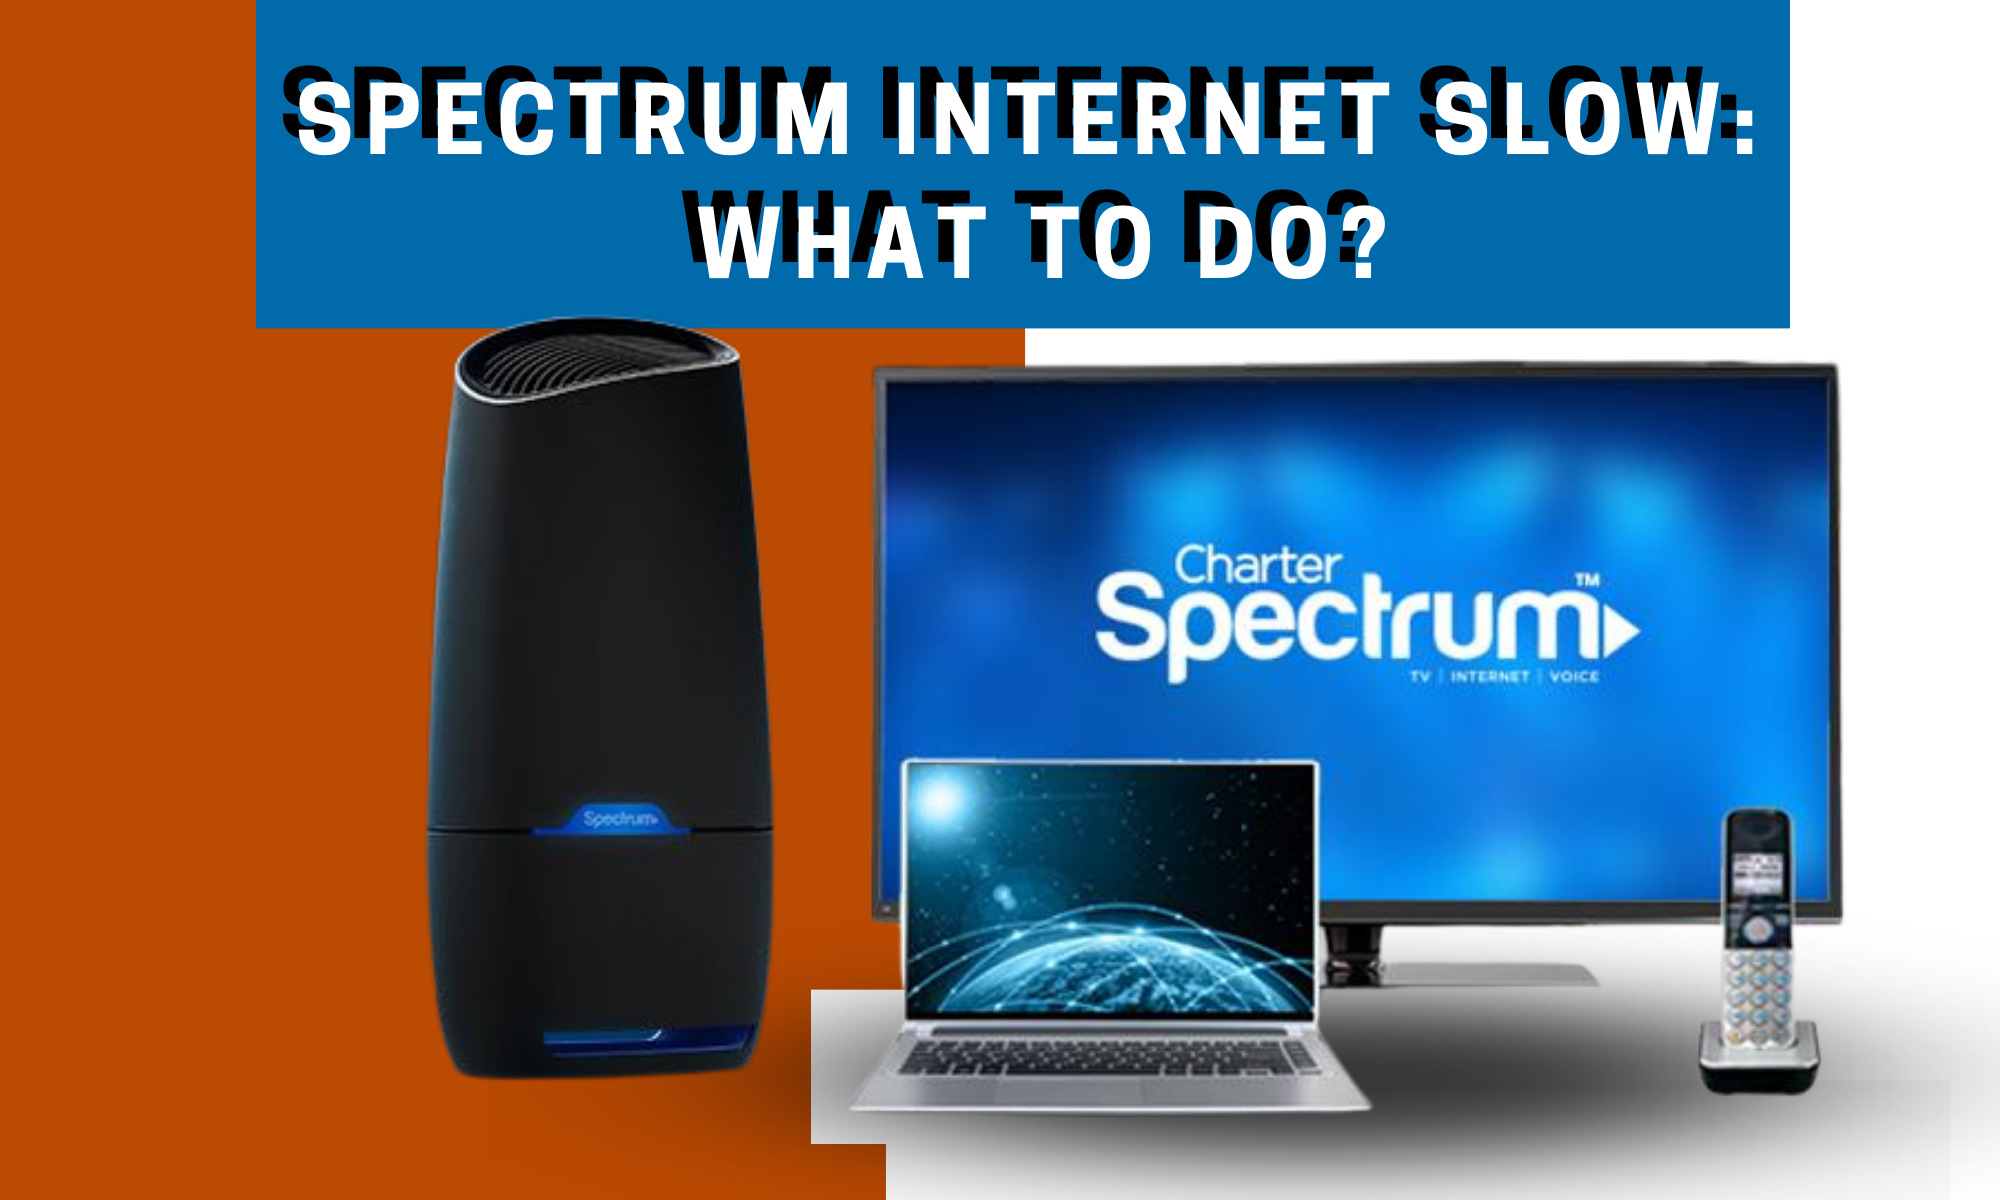 Spectrum Internet Slow: What To Do To Fix It?